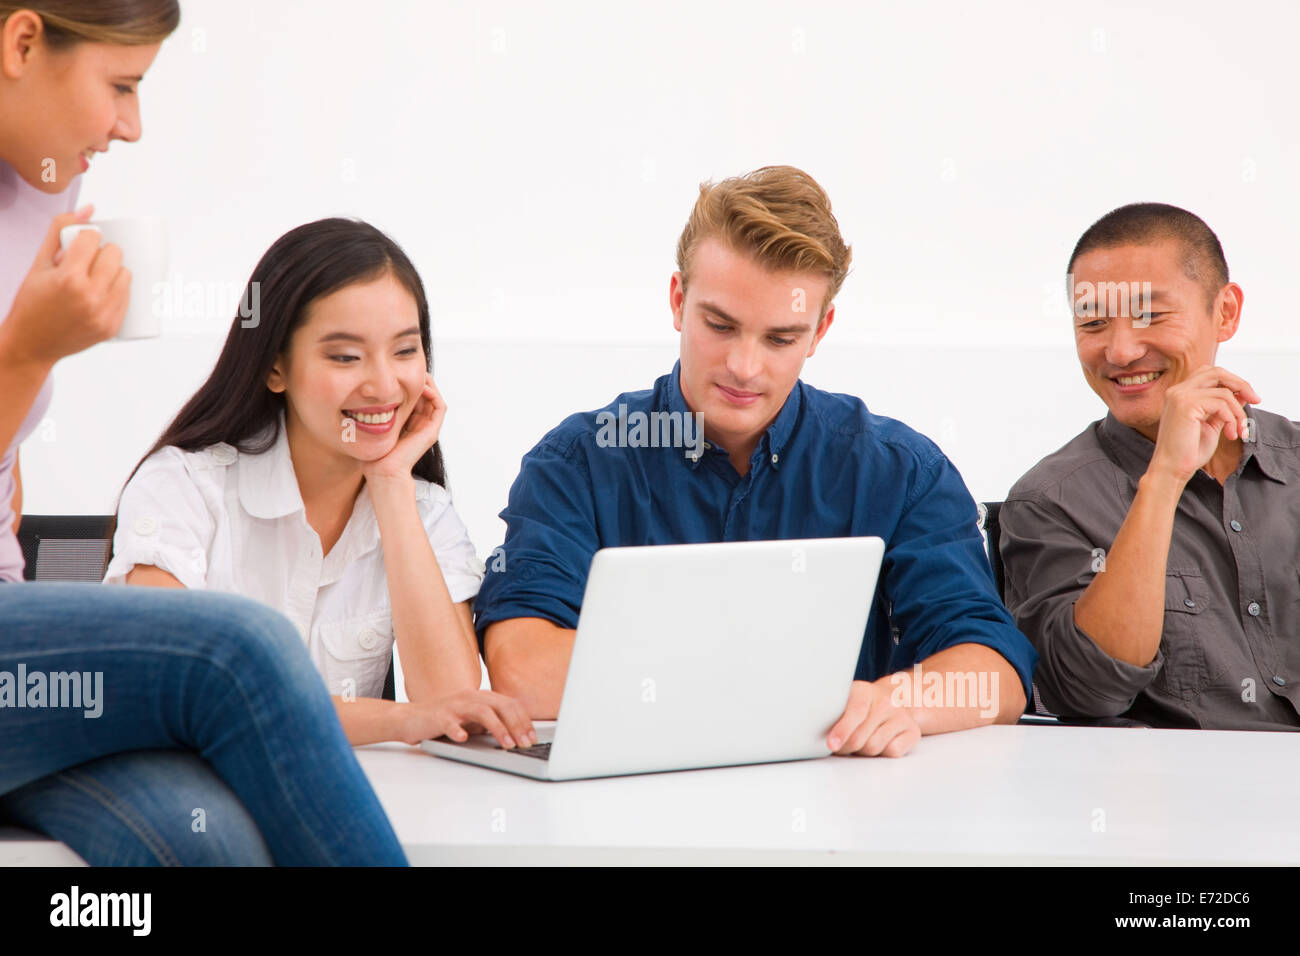 Multi ethnic group of executives looking laptop Stock Photo